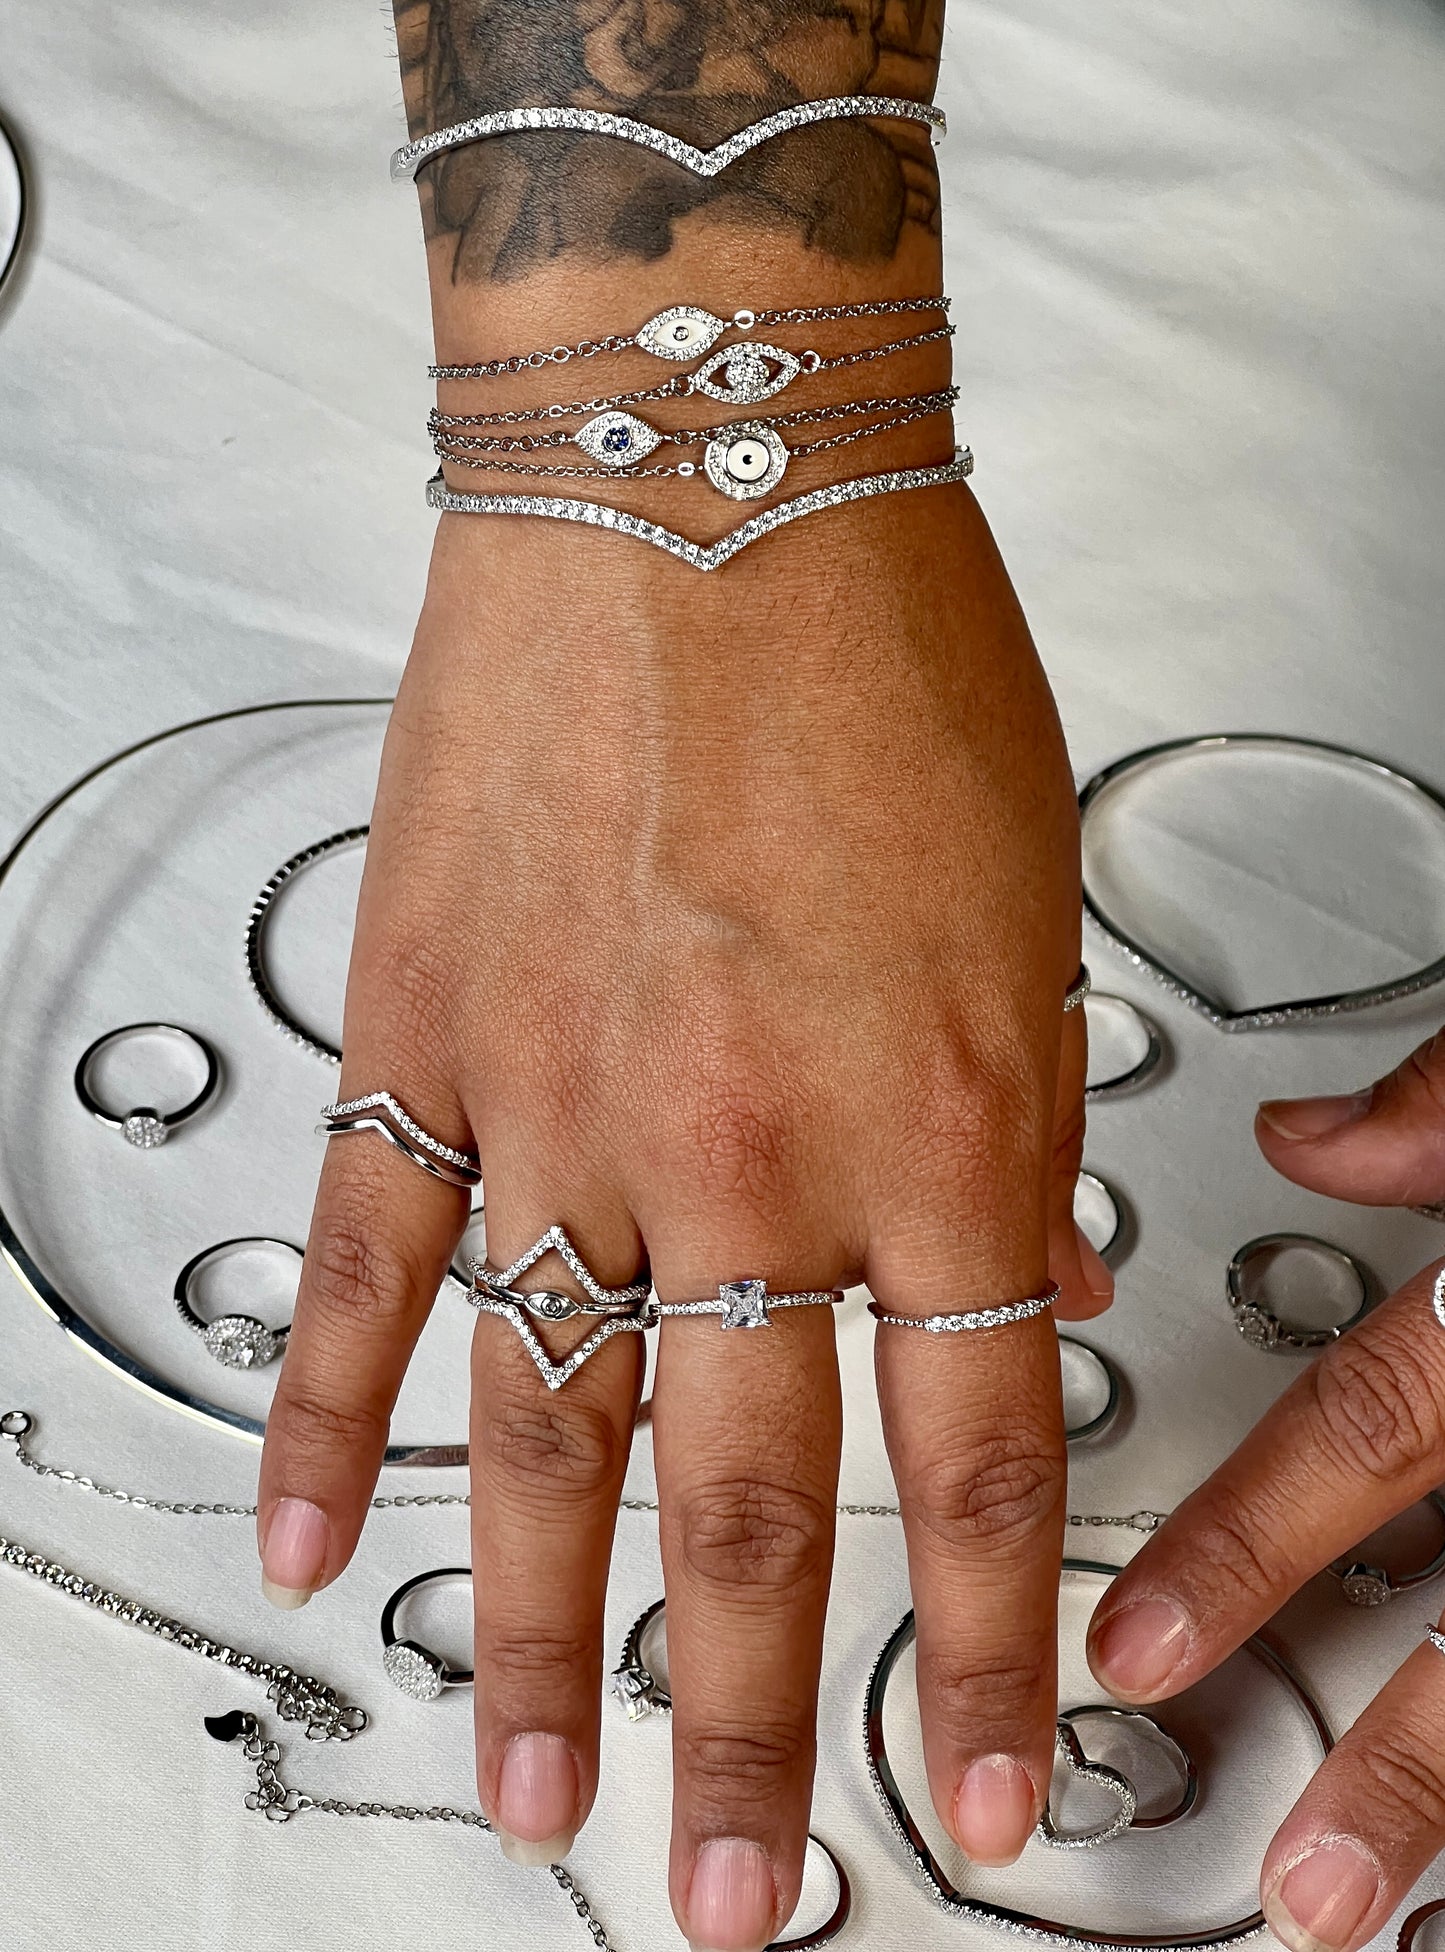 
                  
                    A hand with rings and layered bracelets, including a Cubic Zirconia Chevron Latch Bracelet and other rhodium plated sterling silver pieces, is displayed on a white surface among various elegant jewelry.
                  
                